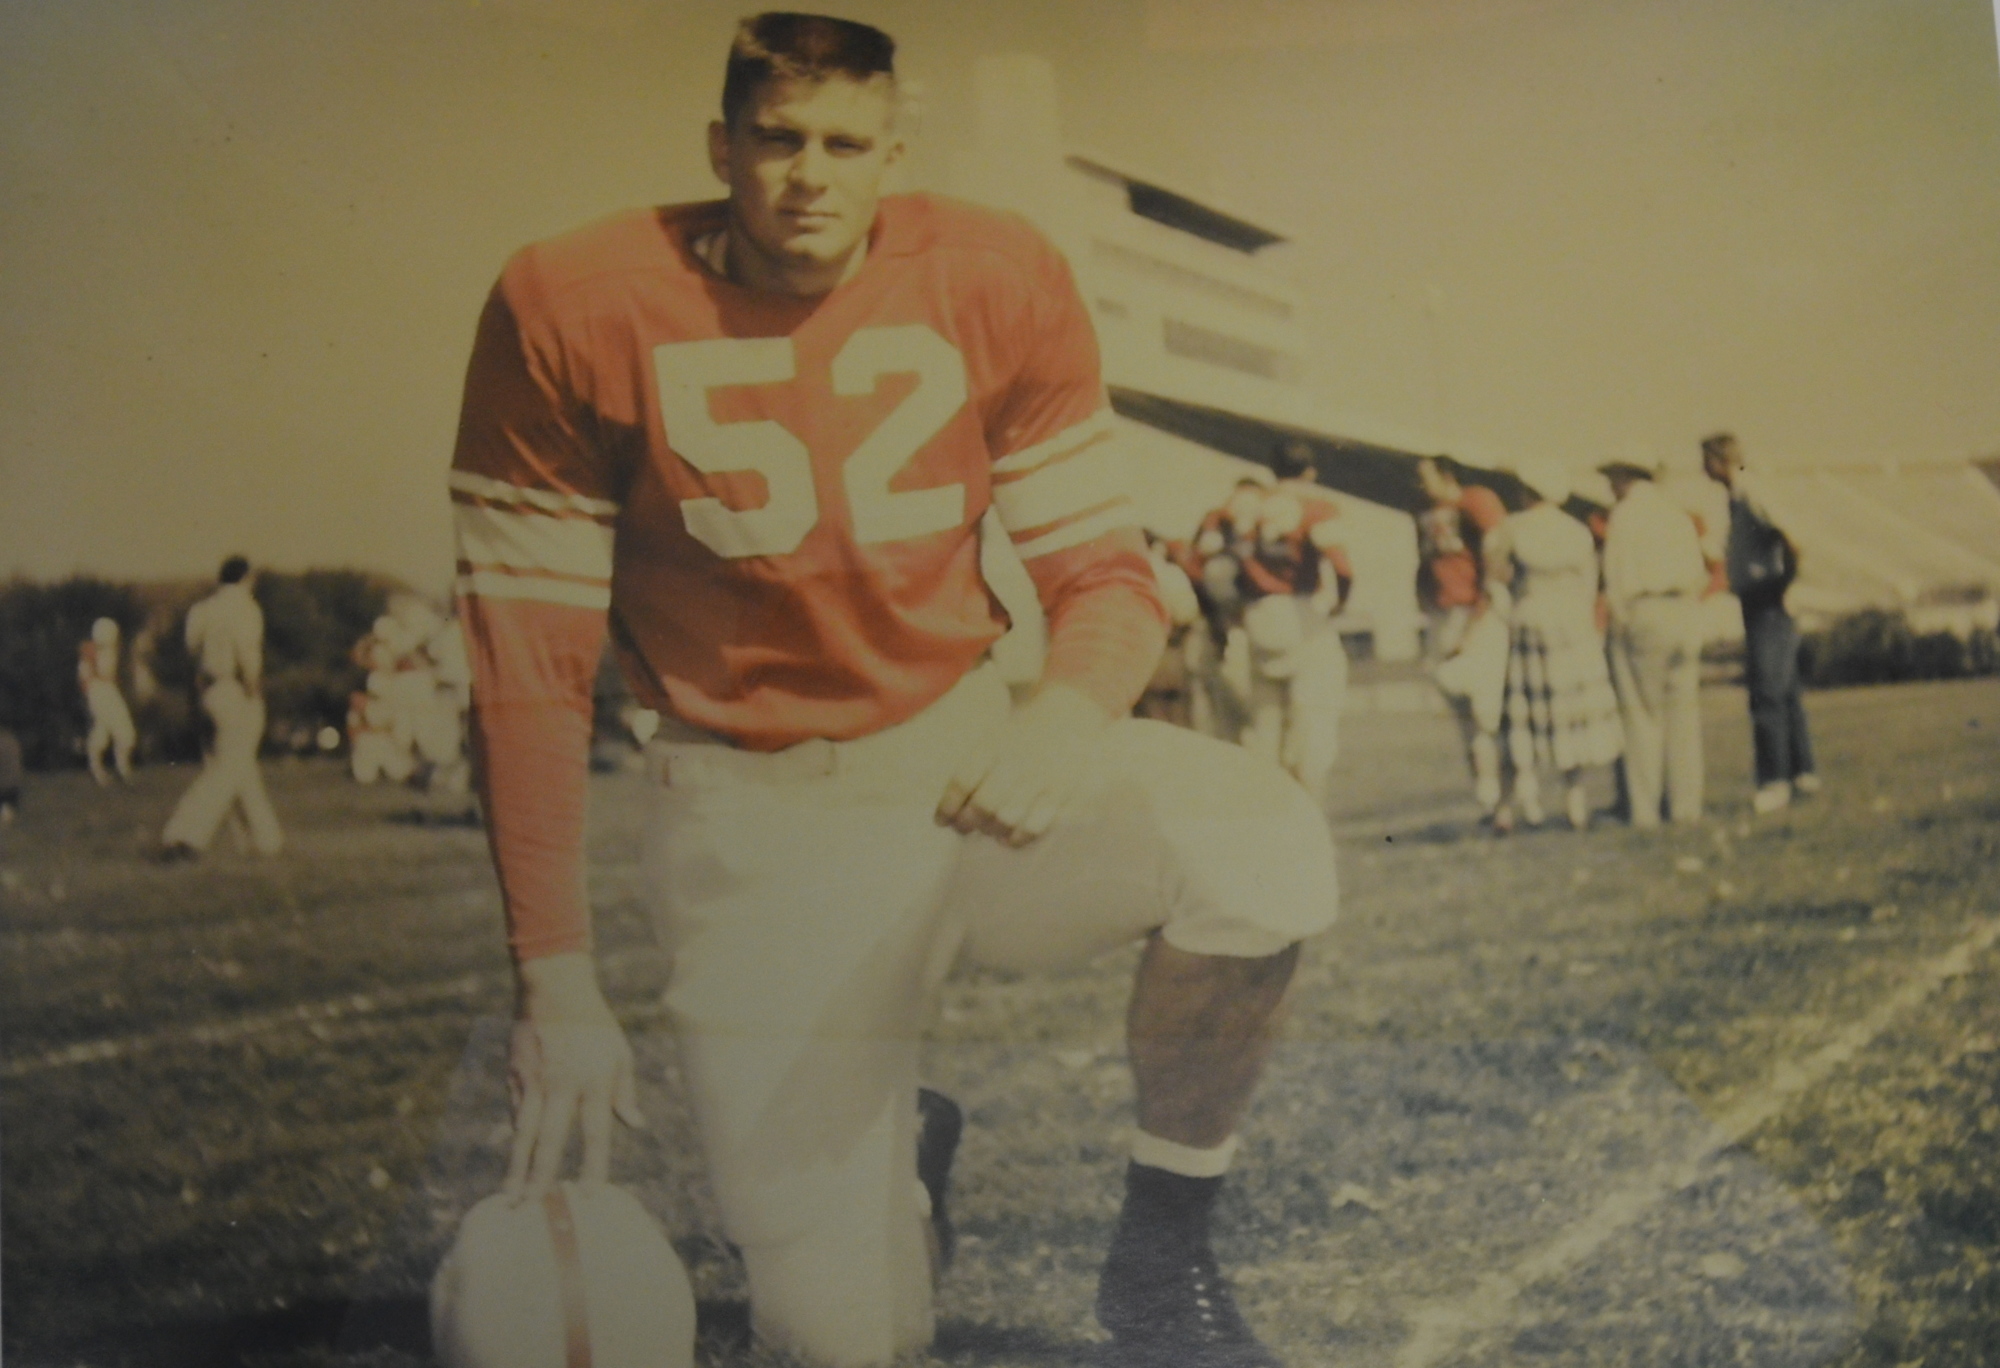 Woody Wolverton played for the University of Oklahoma from 1953 to 1956.